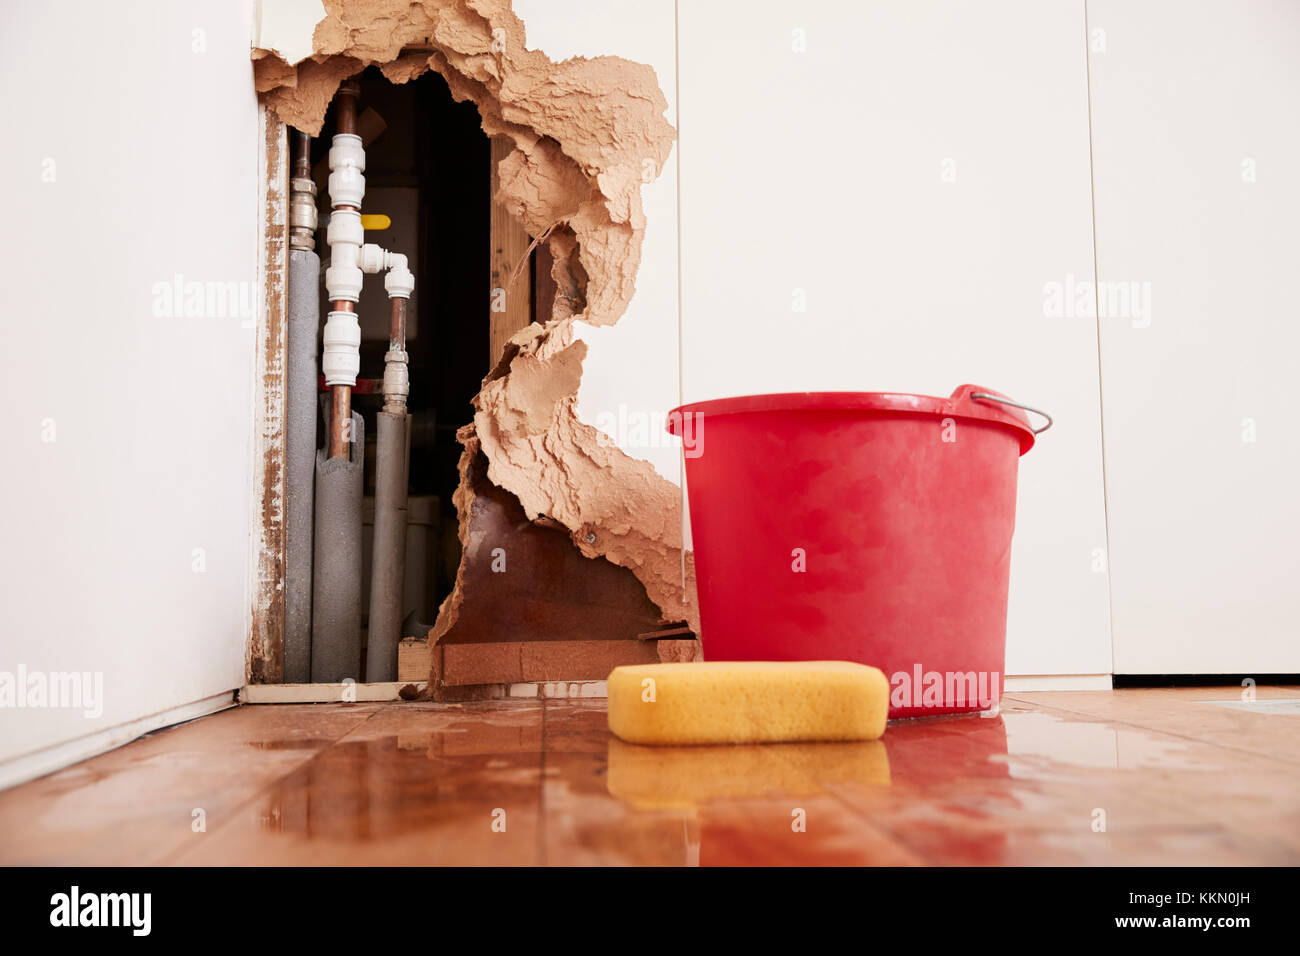 Damaged wall, exposed burst water pipes, sponge and bucket Stock Photo